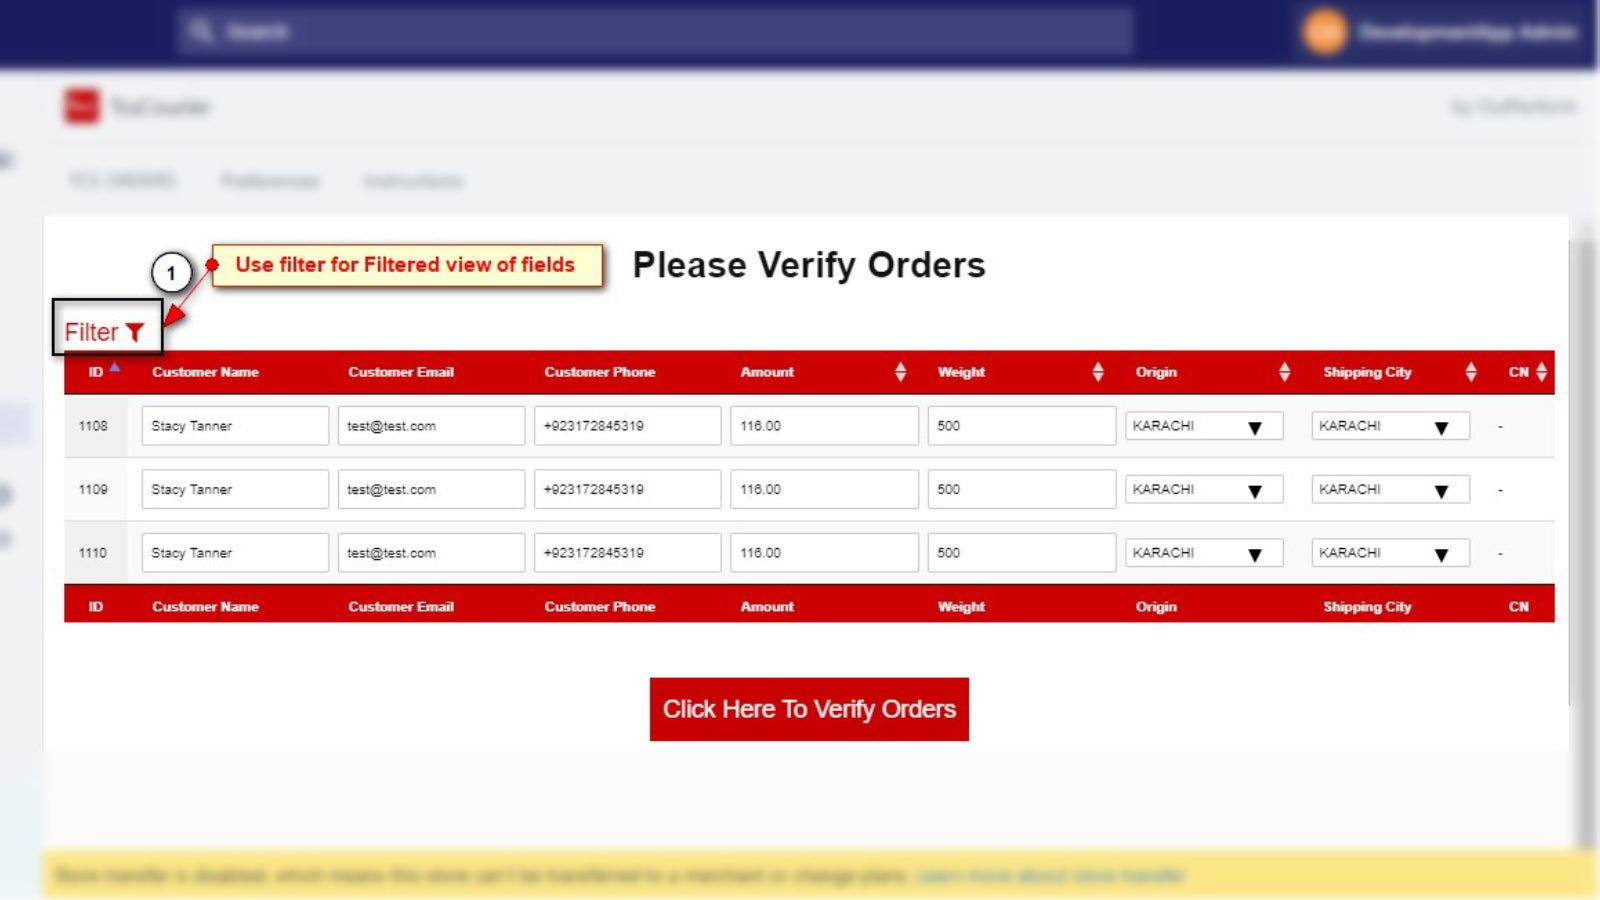 Verify Orders to be pushed to TCS Customer COD Portal. 